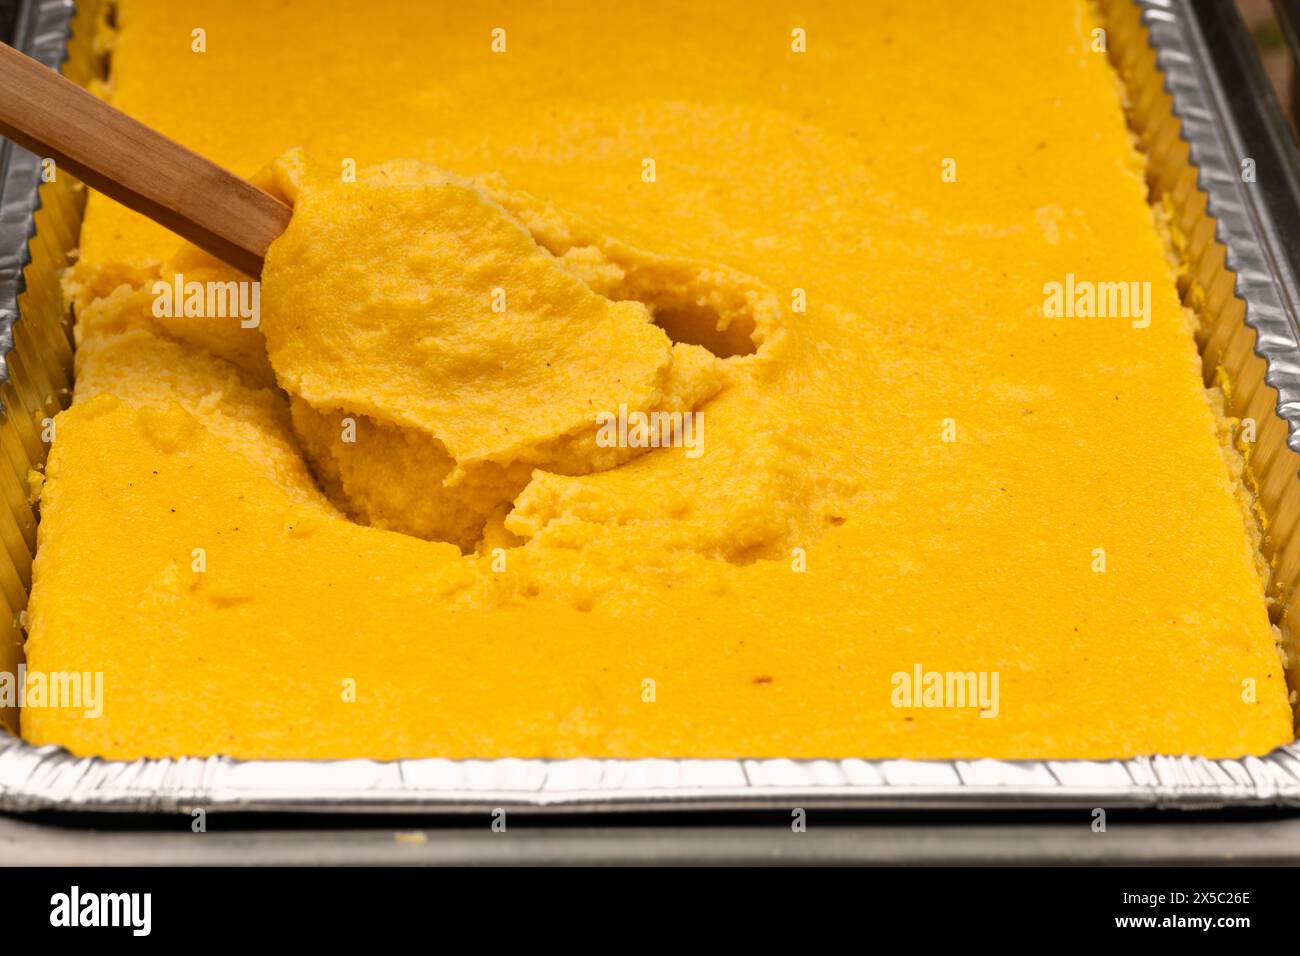 Polenta corn traditional food in an aluminum steam table pan. Party catering concept. Stock Photo